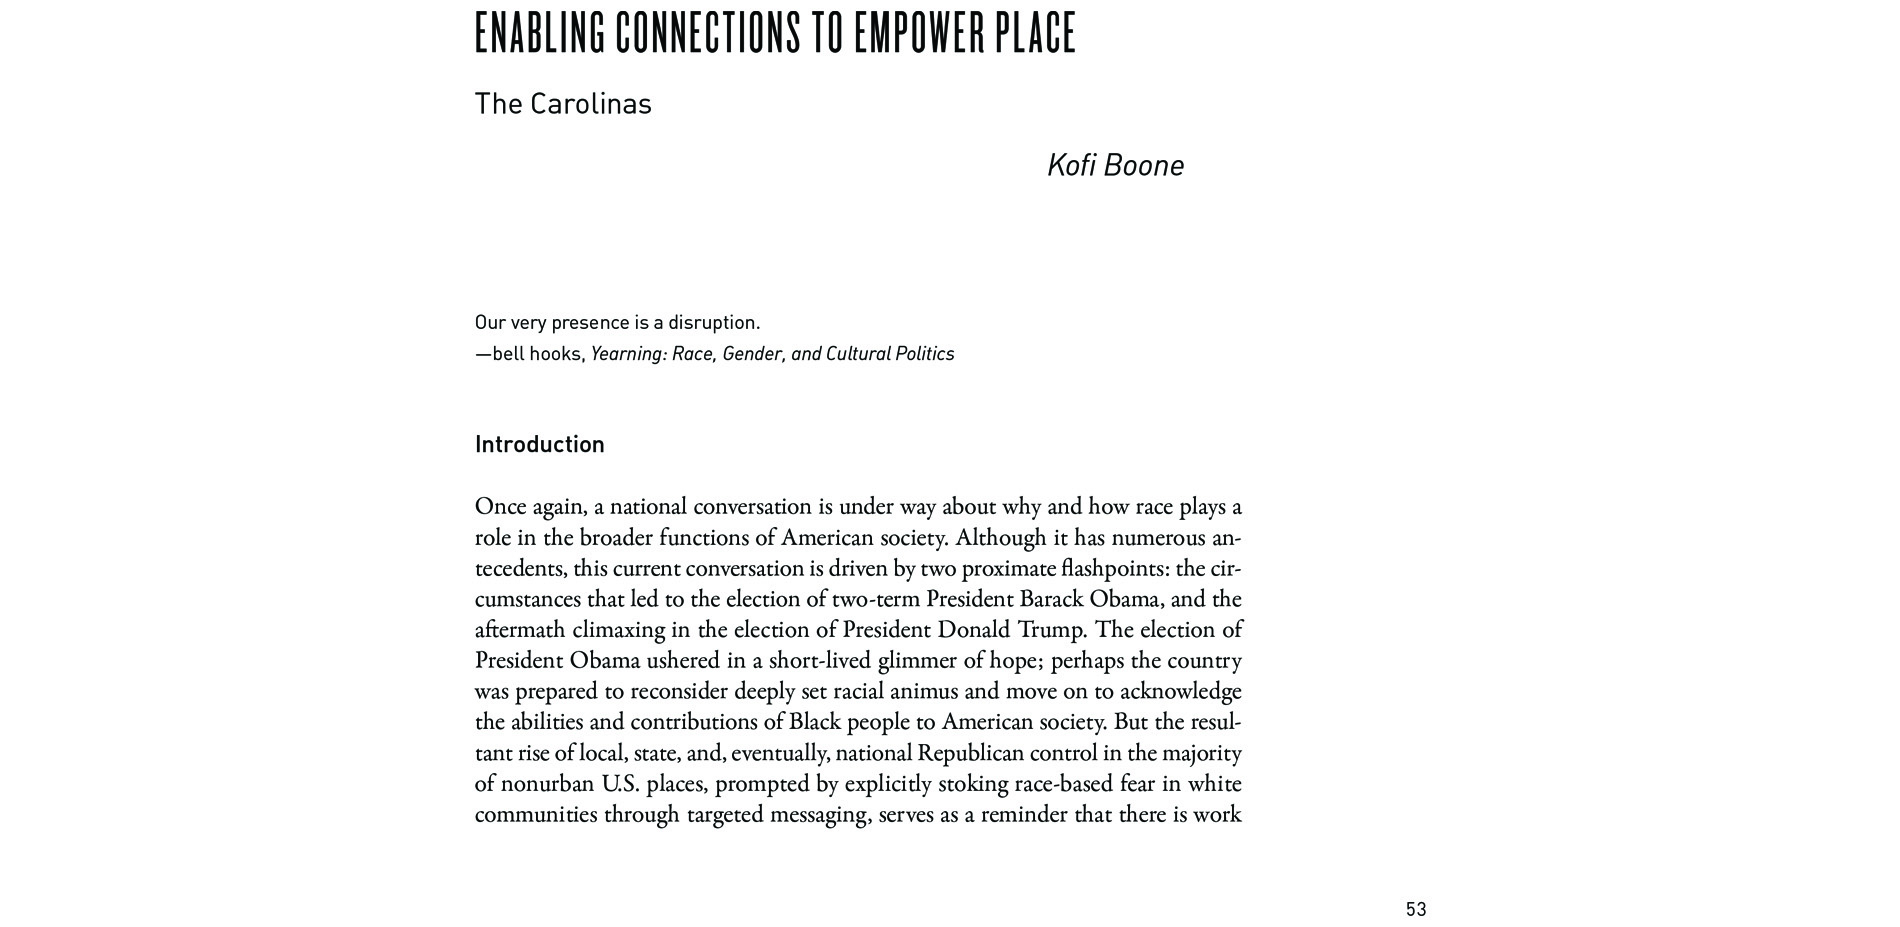 Black Landscapes Matter, Enabling Connections to Empower Place: The Carolinas (pg. 53)